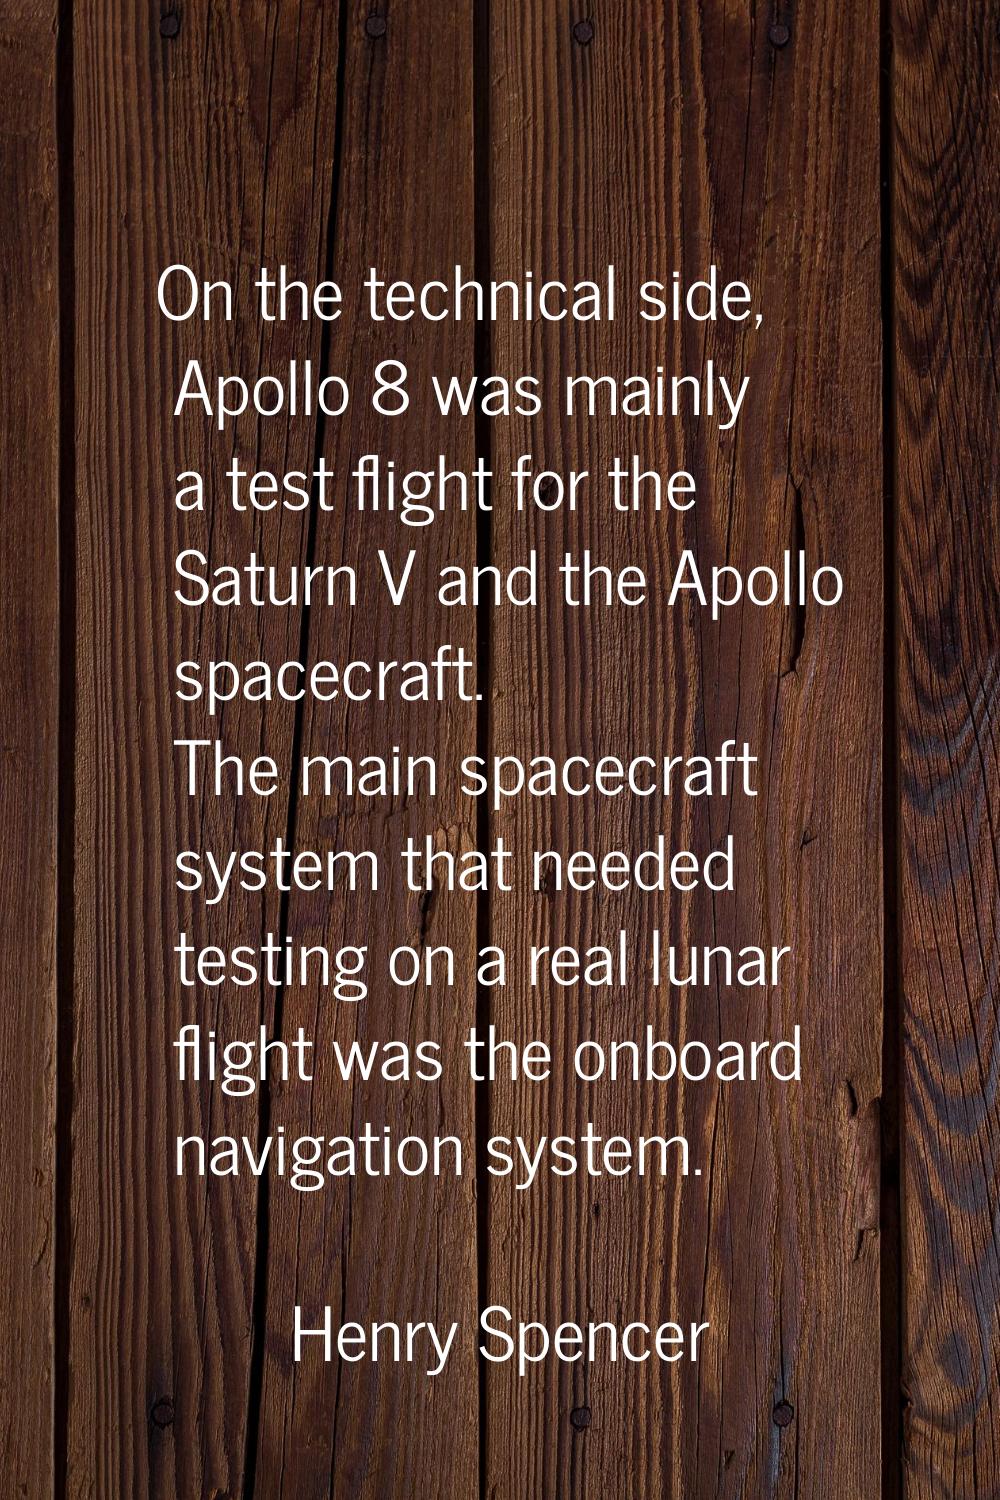 On the technical side, Apollo 8 was mainly a test flight for the Saturn V and the Apollo spacecraft